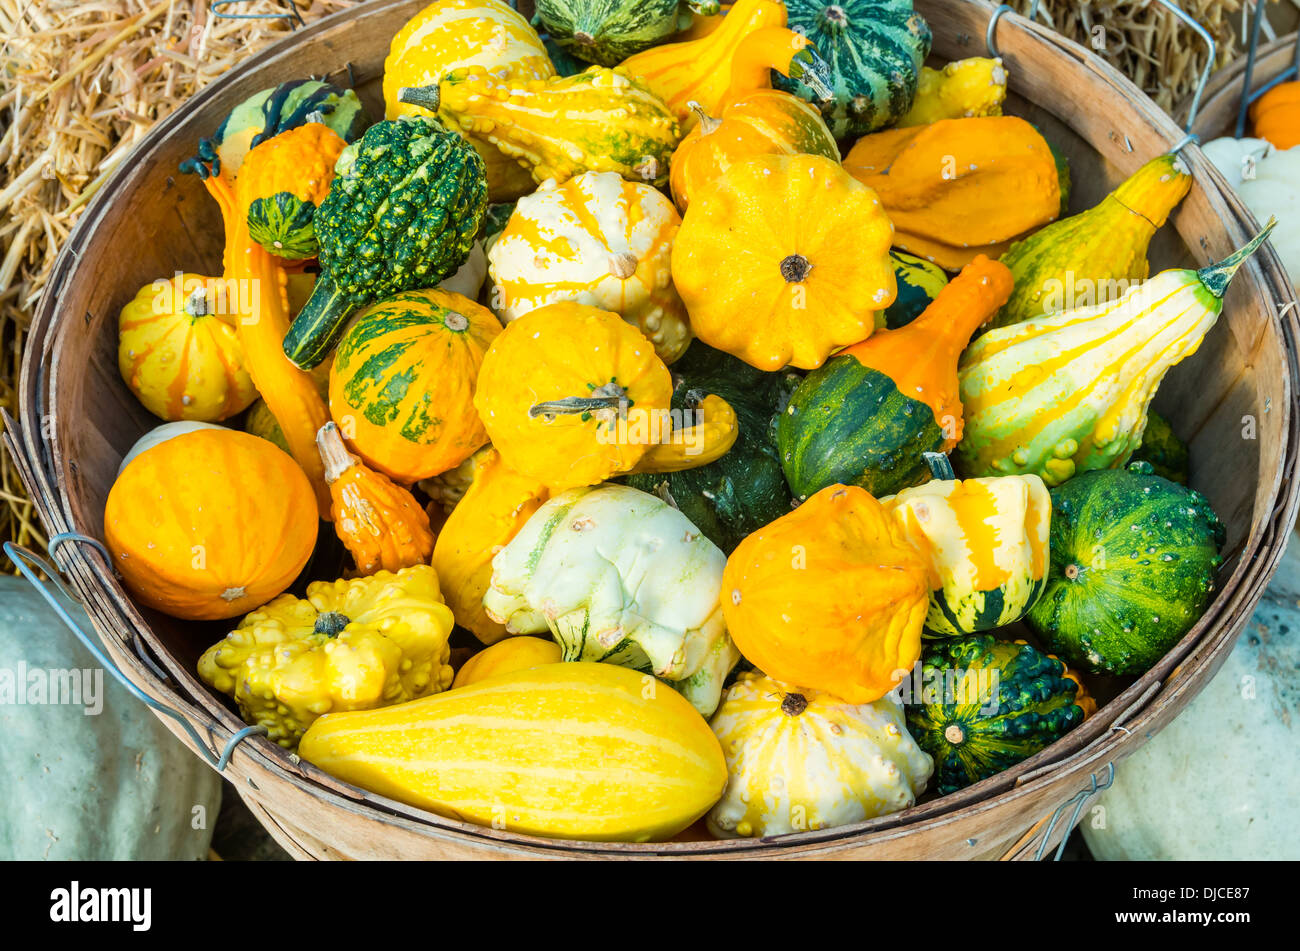 Decorative gourds on display in a basket at the farmers market Stock Photo